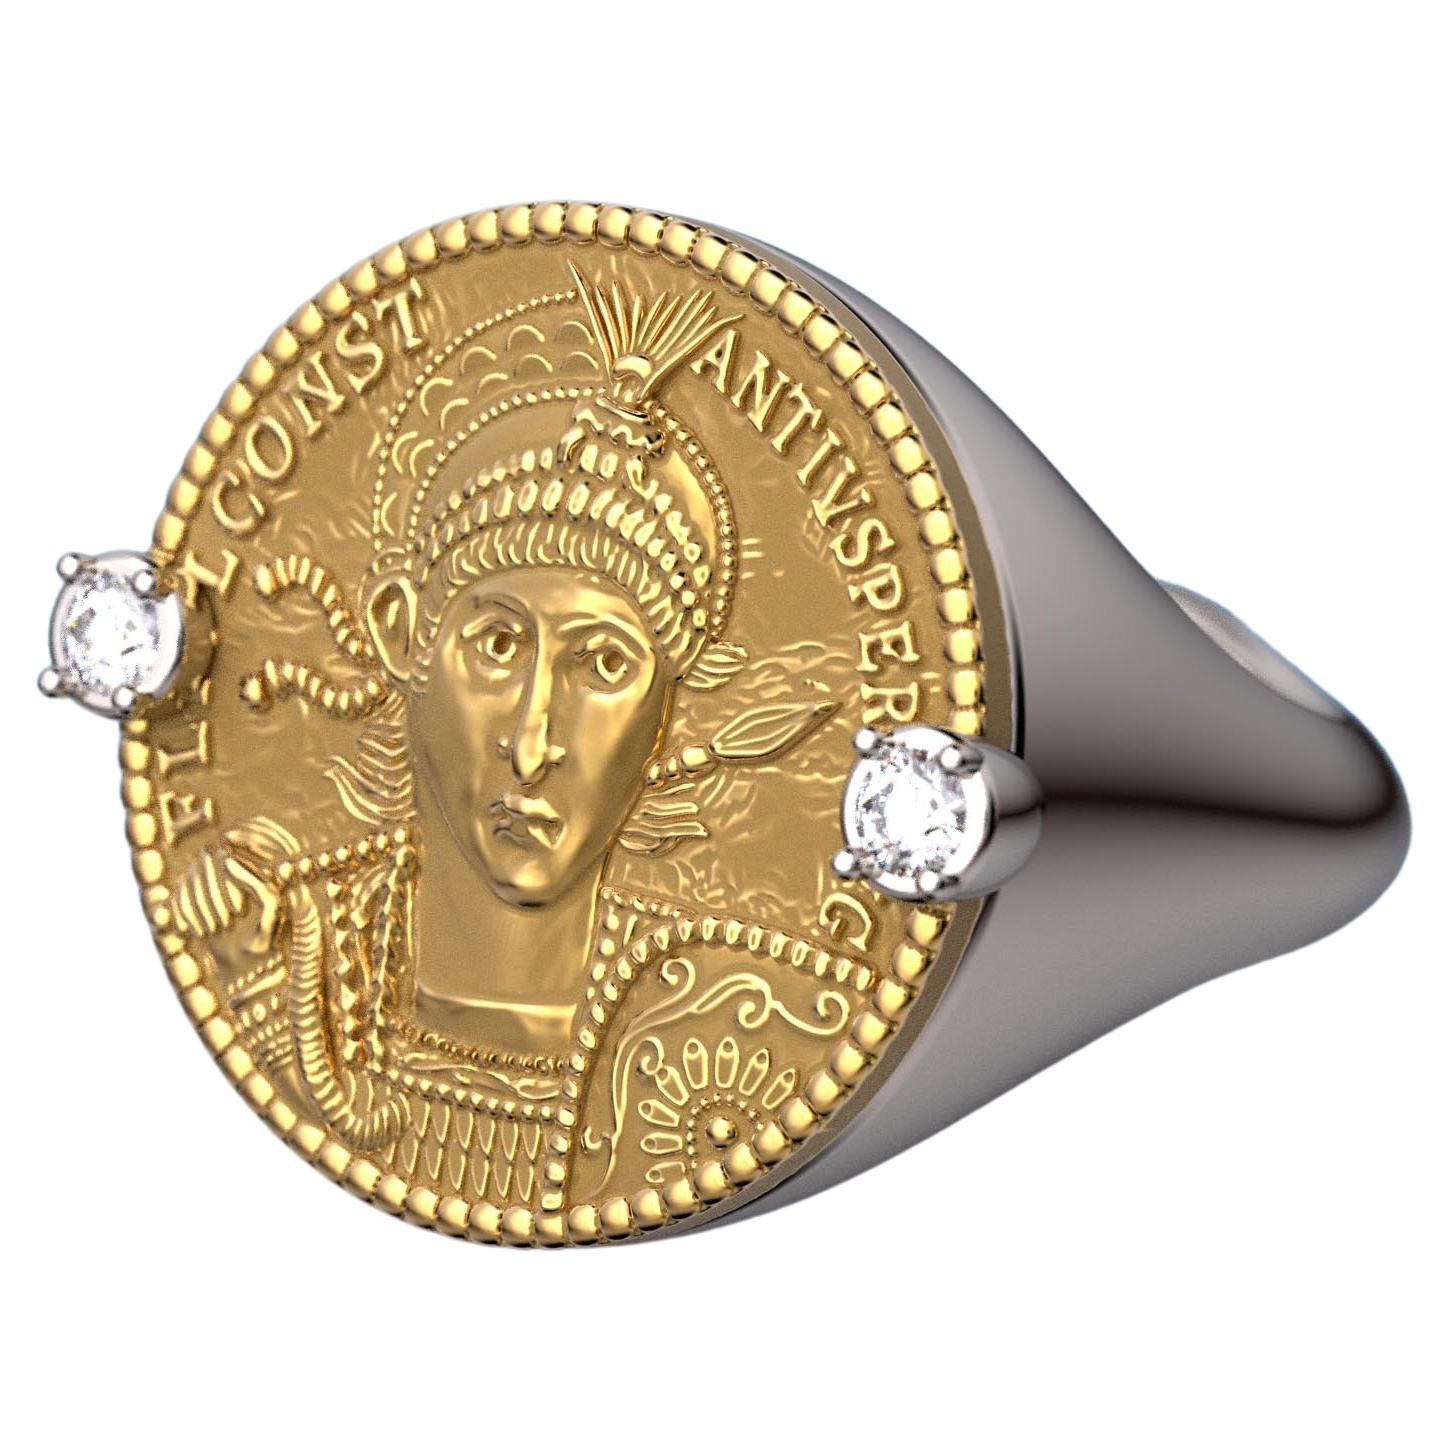 18k Ancient Roman Style Gold Coin Ring with a reproduction of a Roman Solidus